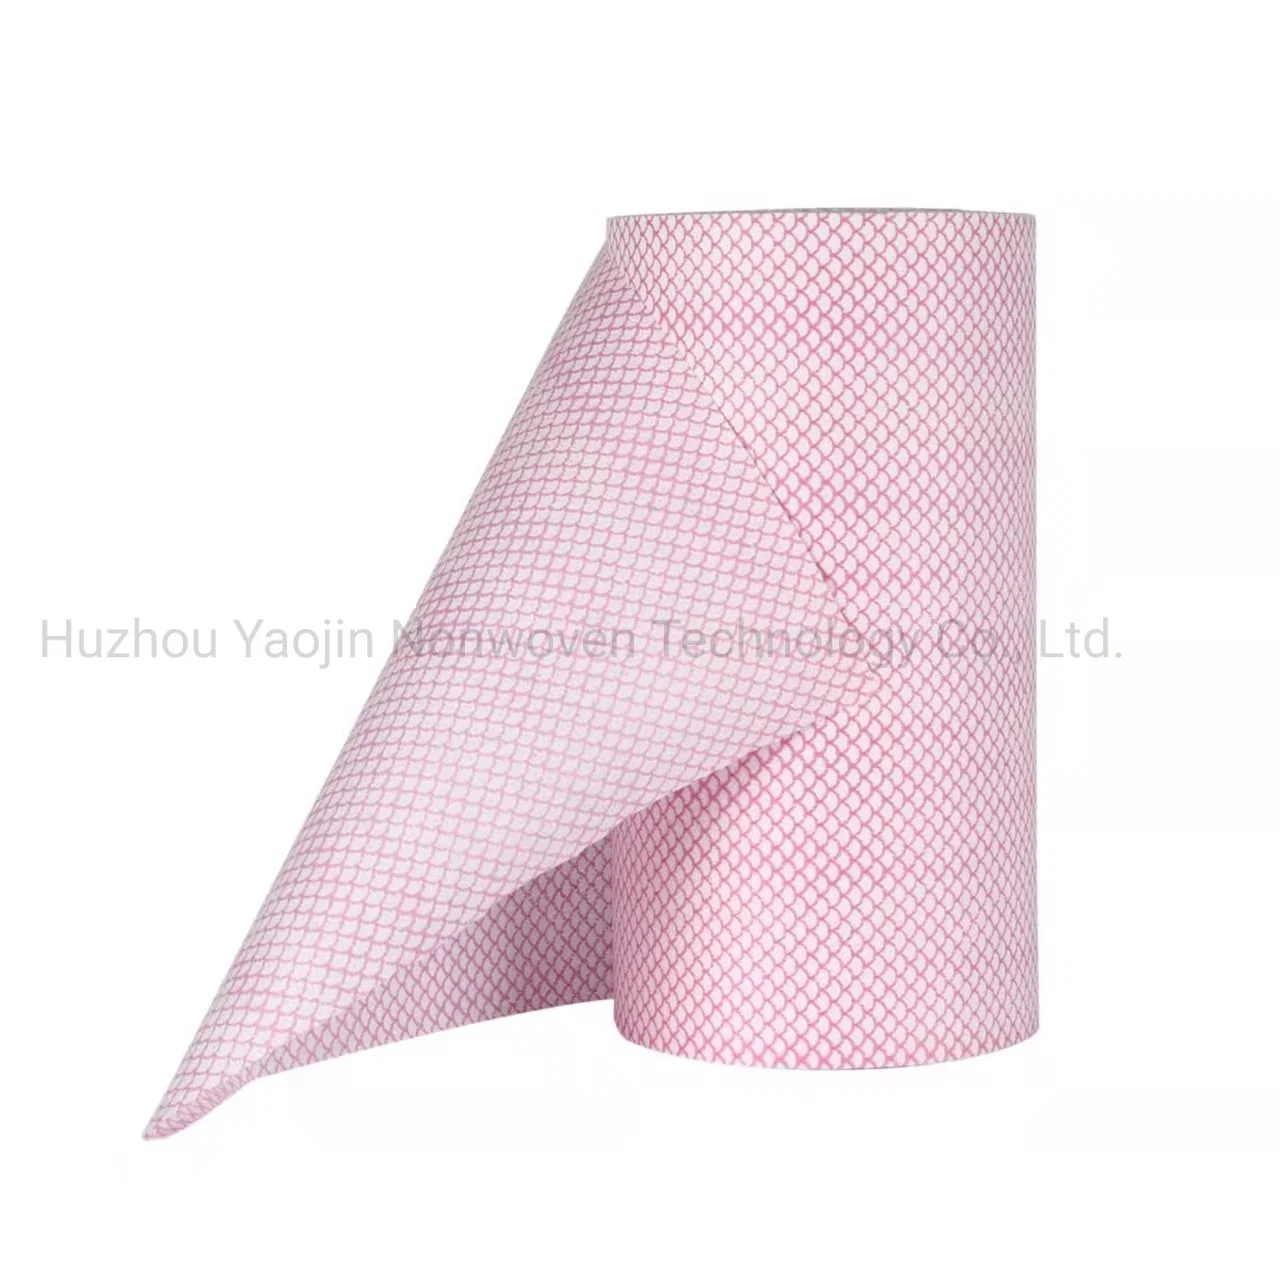 China Manufacturer Wholesale Heavy Duty Industry or Home and Kitchen Dry Wipes and Cleaning Cloths in Roll